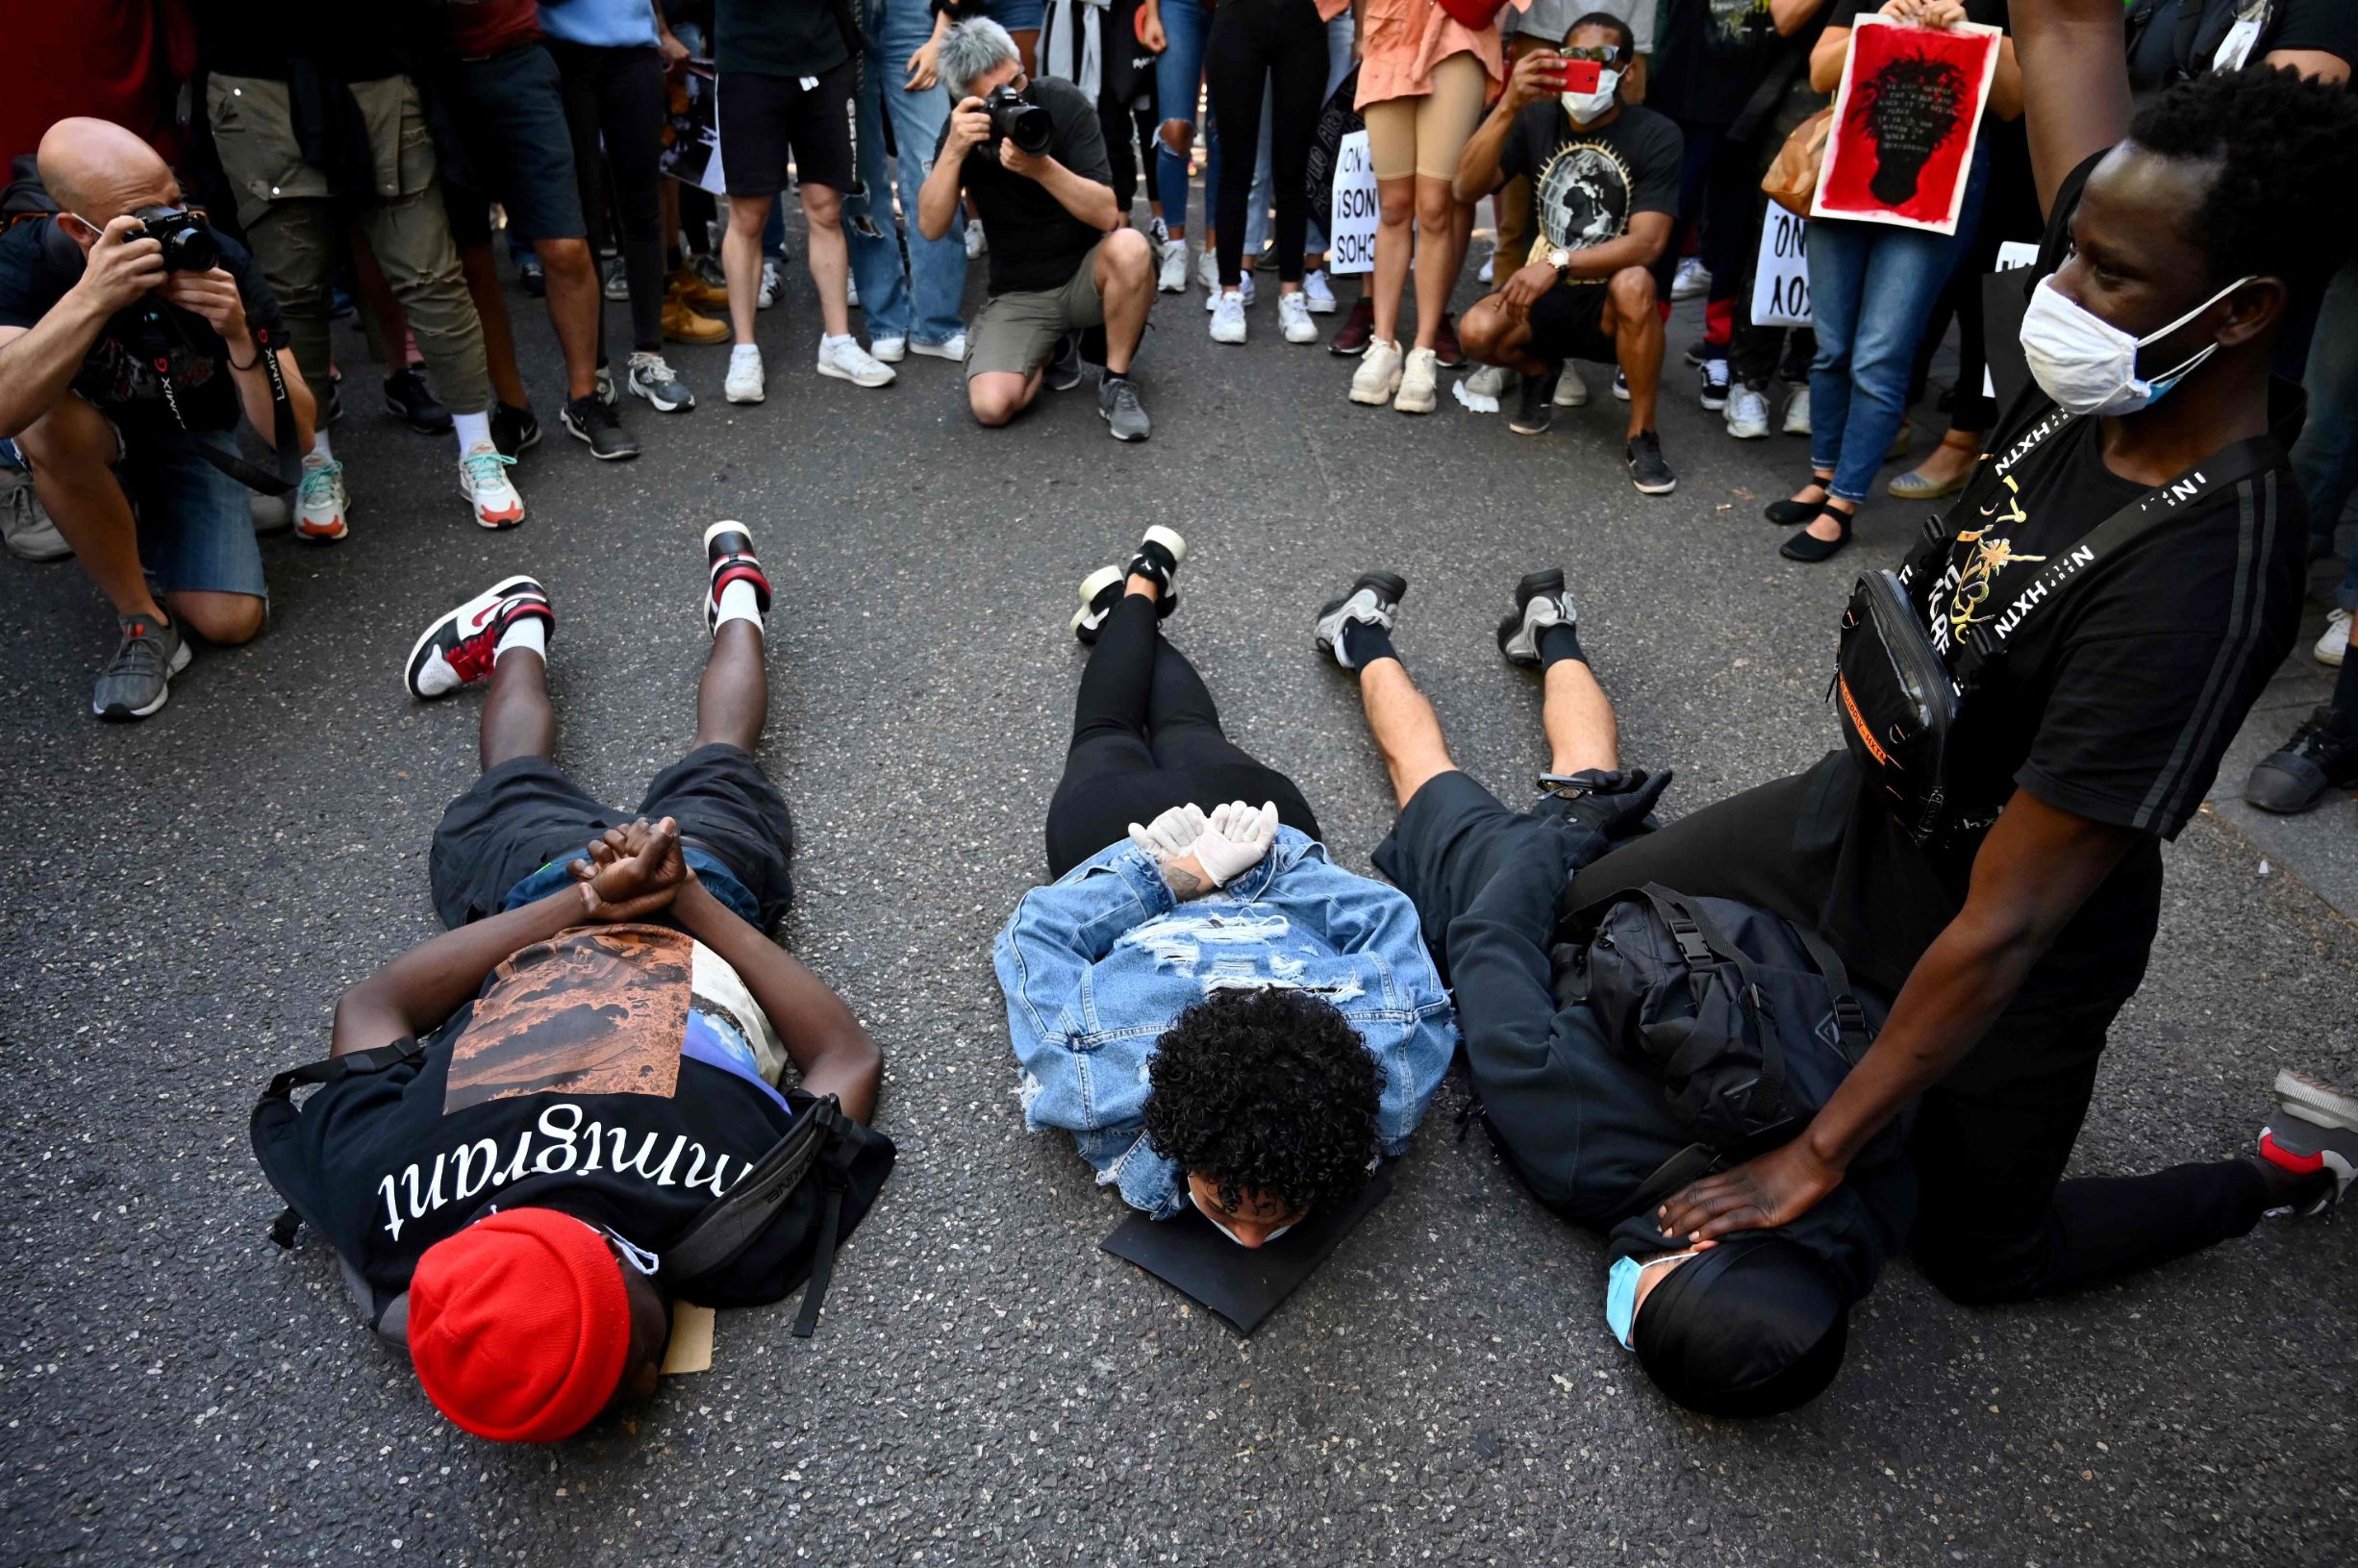 Protesters re-enact the event leading to the death of George Floyd, an unarmed black man who died after a white policeman knelt on his neck during an arrest in the US, in Madrid, on June 7, 2020 during a demonstration against racism and in solidarity with the Black Lives Matter movement. (Photo by Gabriel BOUYS / AFP)